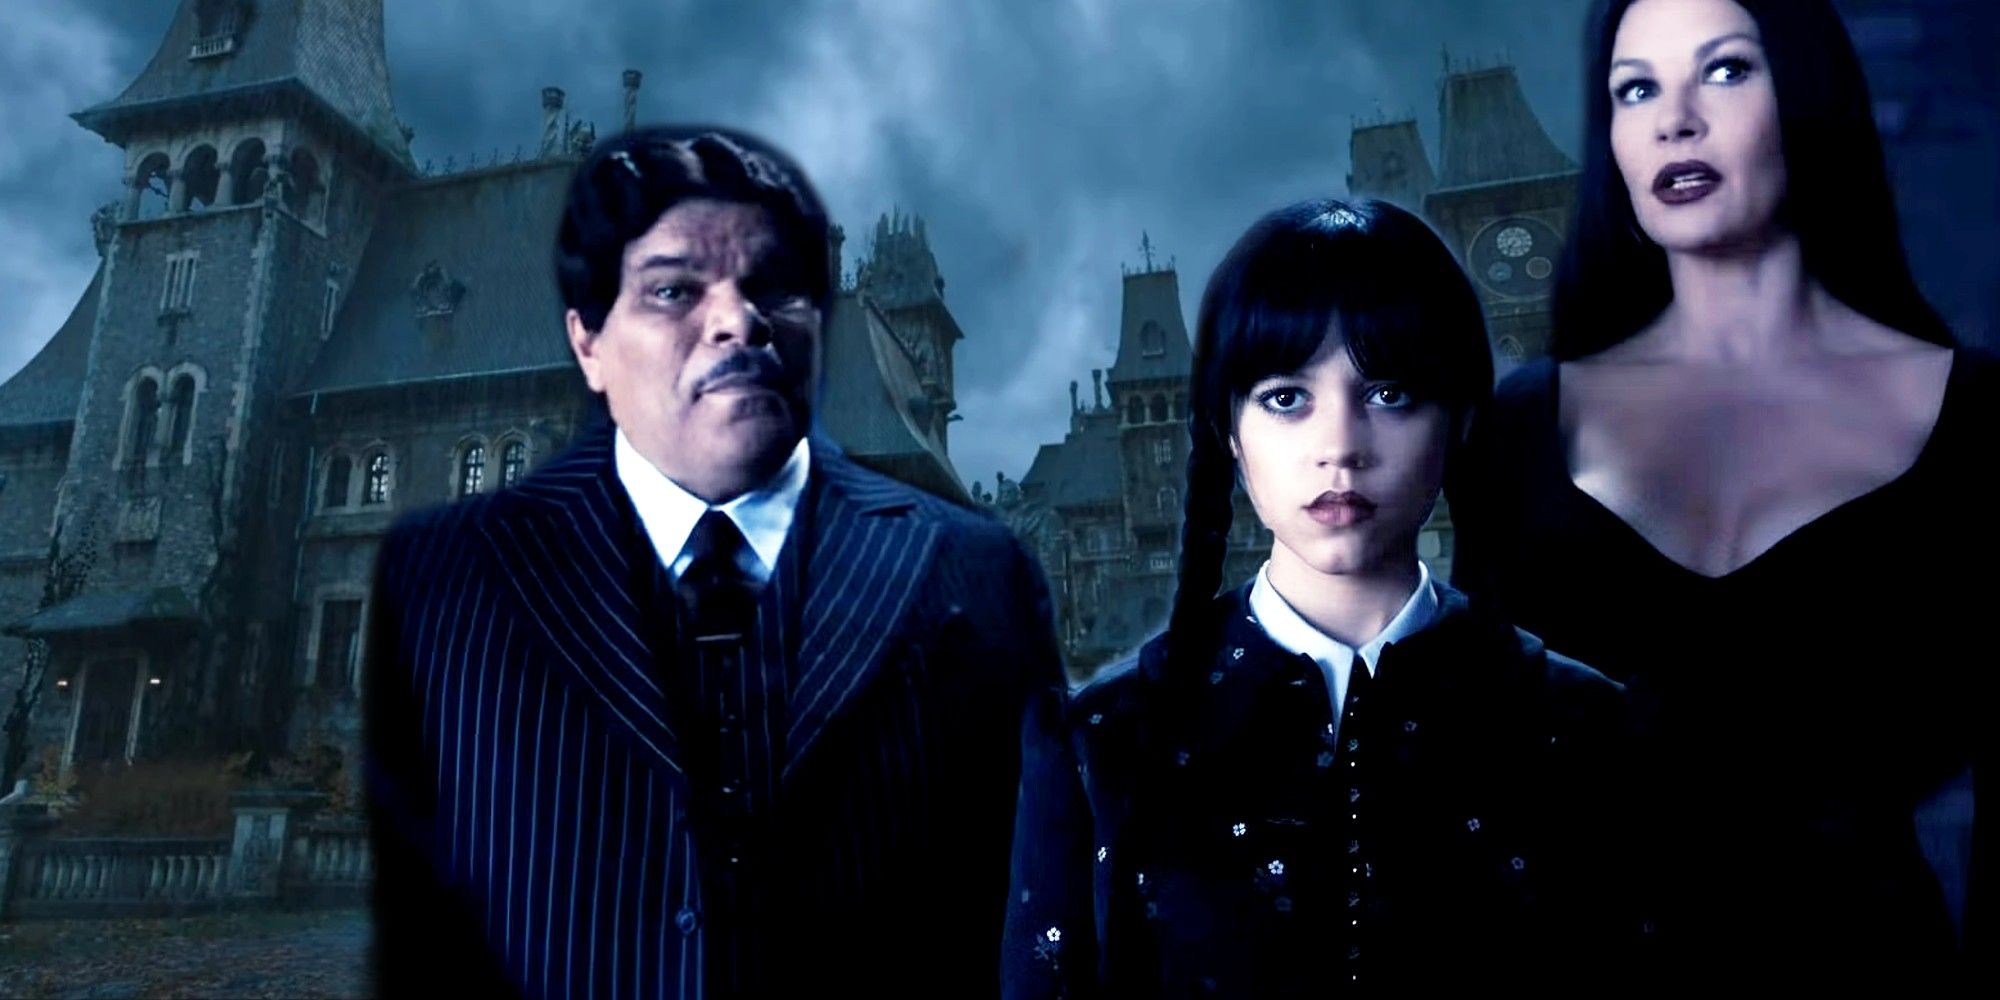 Gomez, Morticia, and Wednesday Addams with the Nevermore Academy in the background